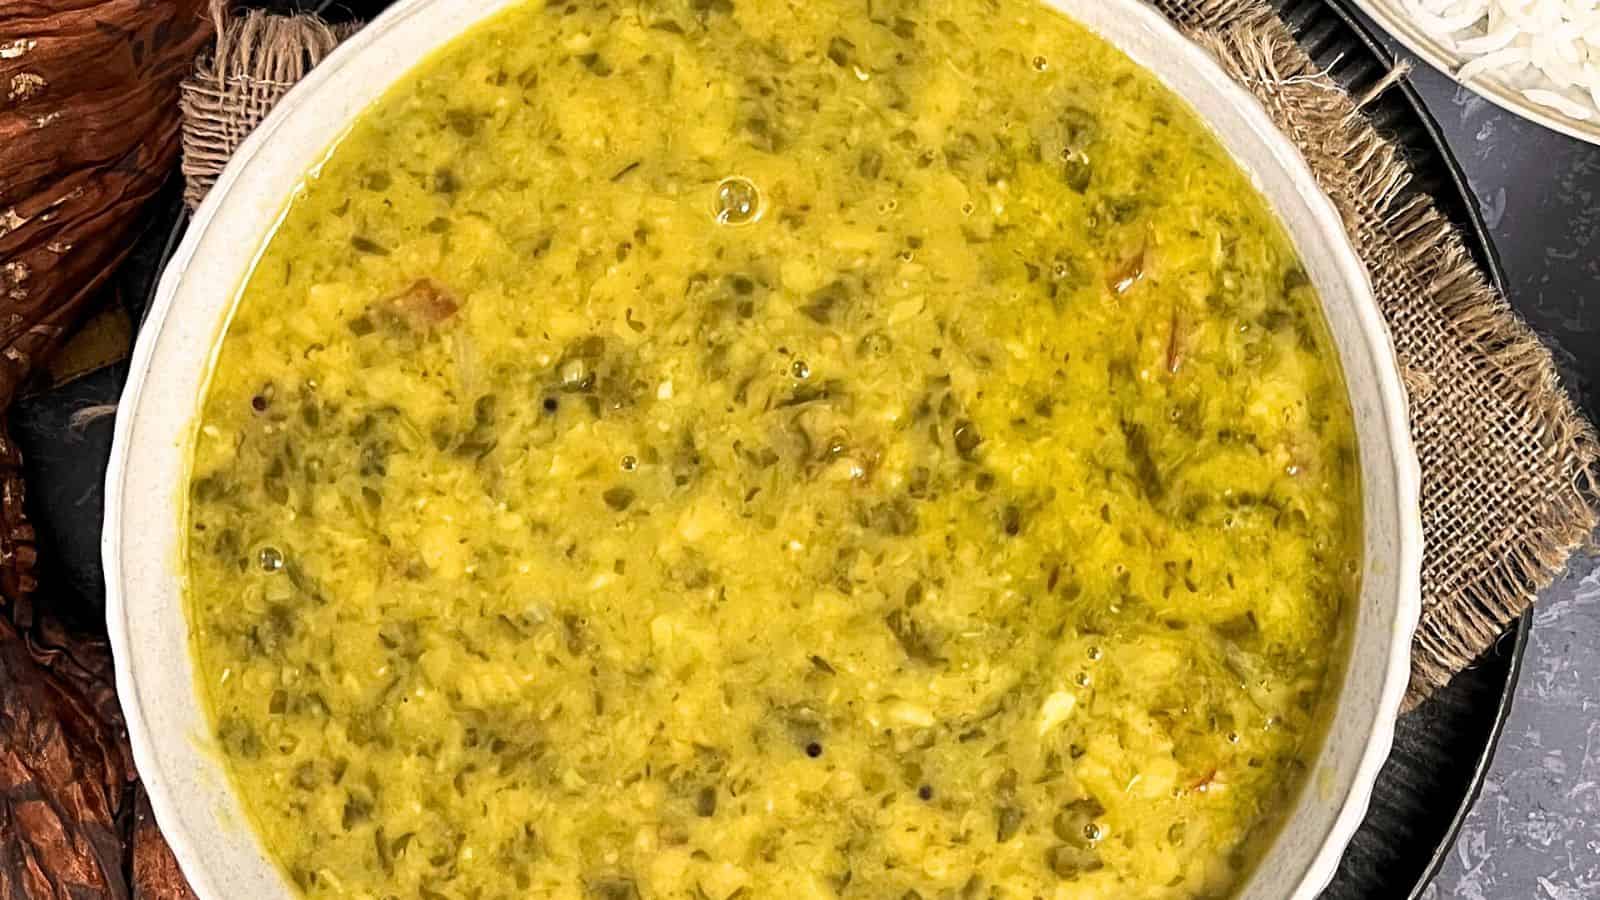 <p>Joining lentils with spinach gives us Dal Palak. It's a nutrient-packed dish that's warm, comforting, and super tasty. Among underrated Indian dishes, this one is a clear winner, nourishing you inside out.<br><strong>Get the Recipe: </strong><a href="https://easyindiancookbook.com/dal-palak-spinach-dal/?utm_source=msn&utm_medium=page&utm_campaign=msn">Dal Palak (Spinach Dal)</a></p>